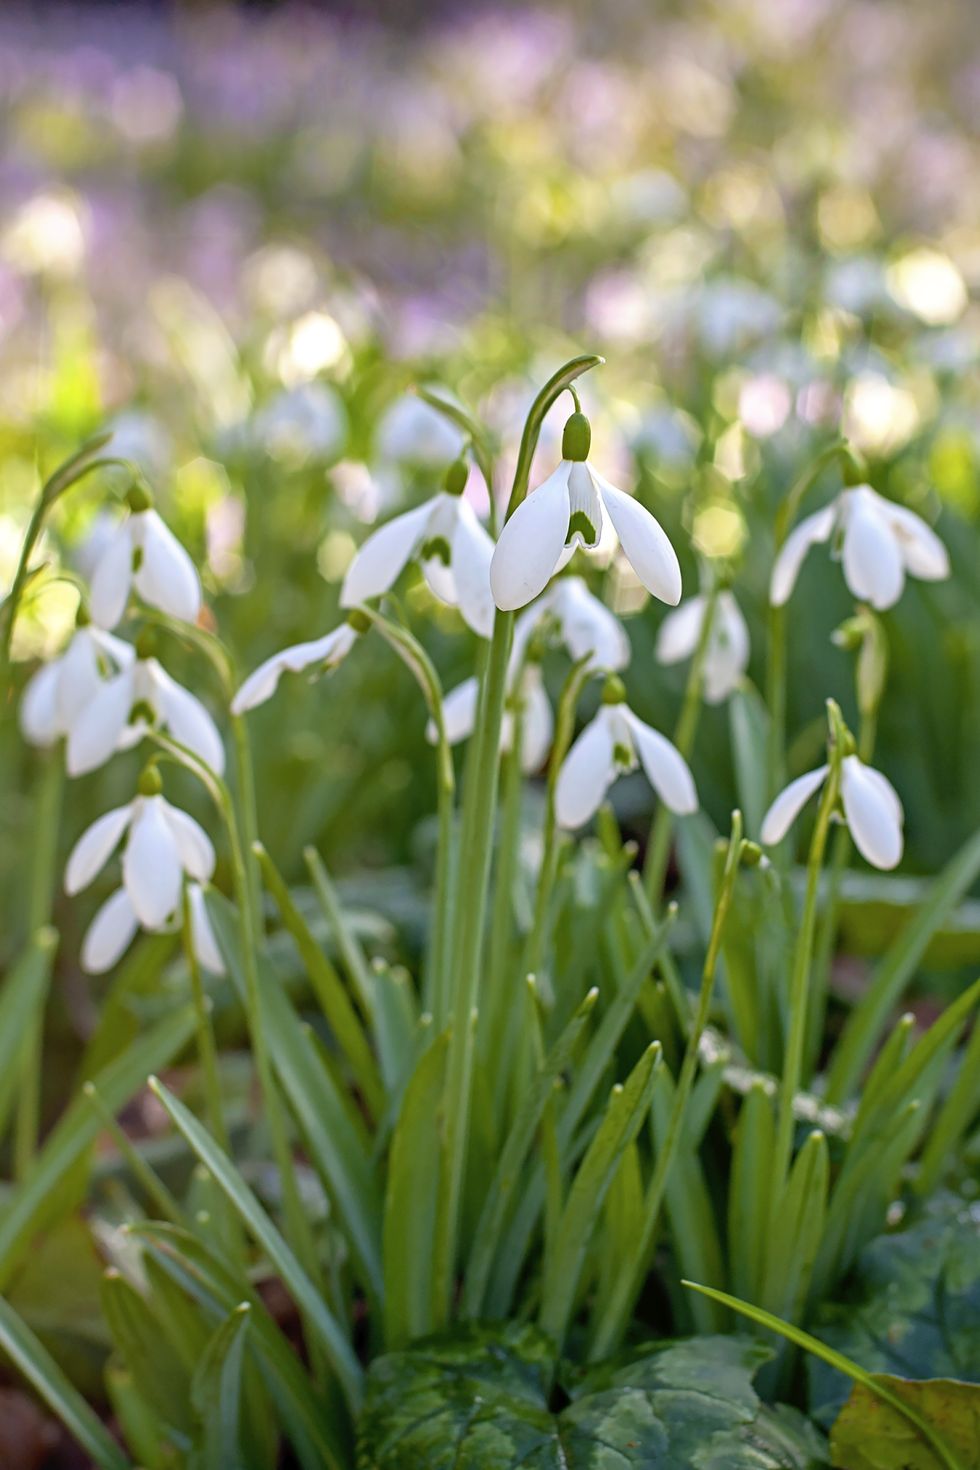 close up image of the spring flowering white, common snowdrop flowers also known as galanthus nivalis